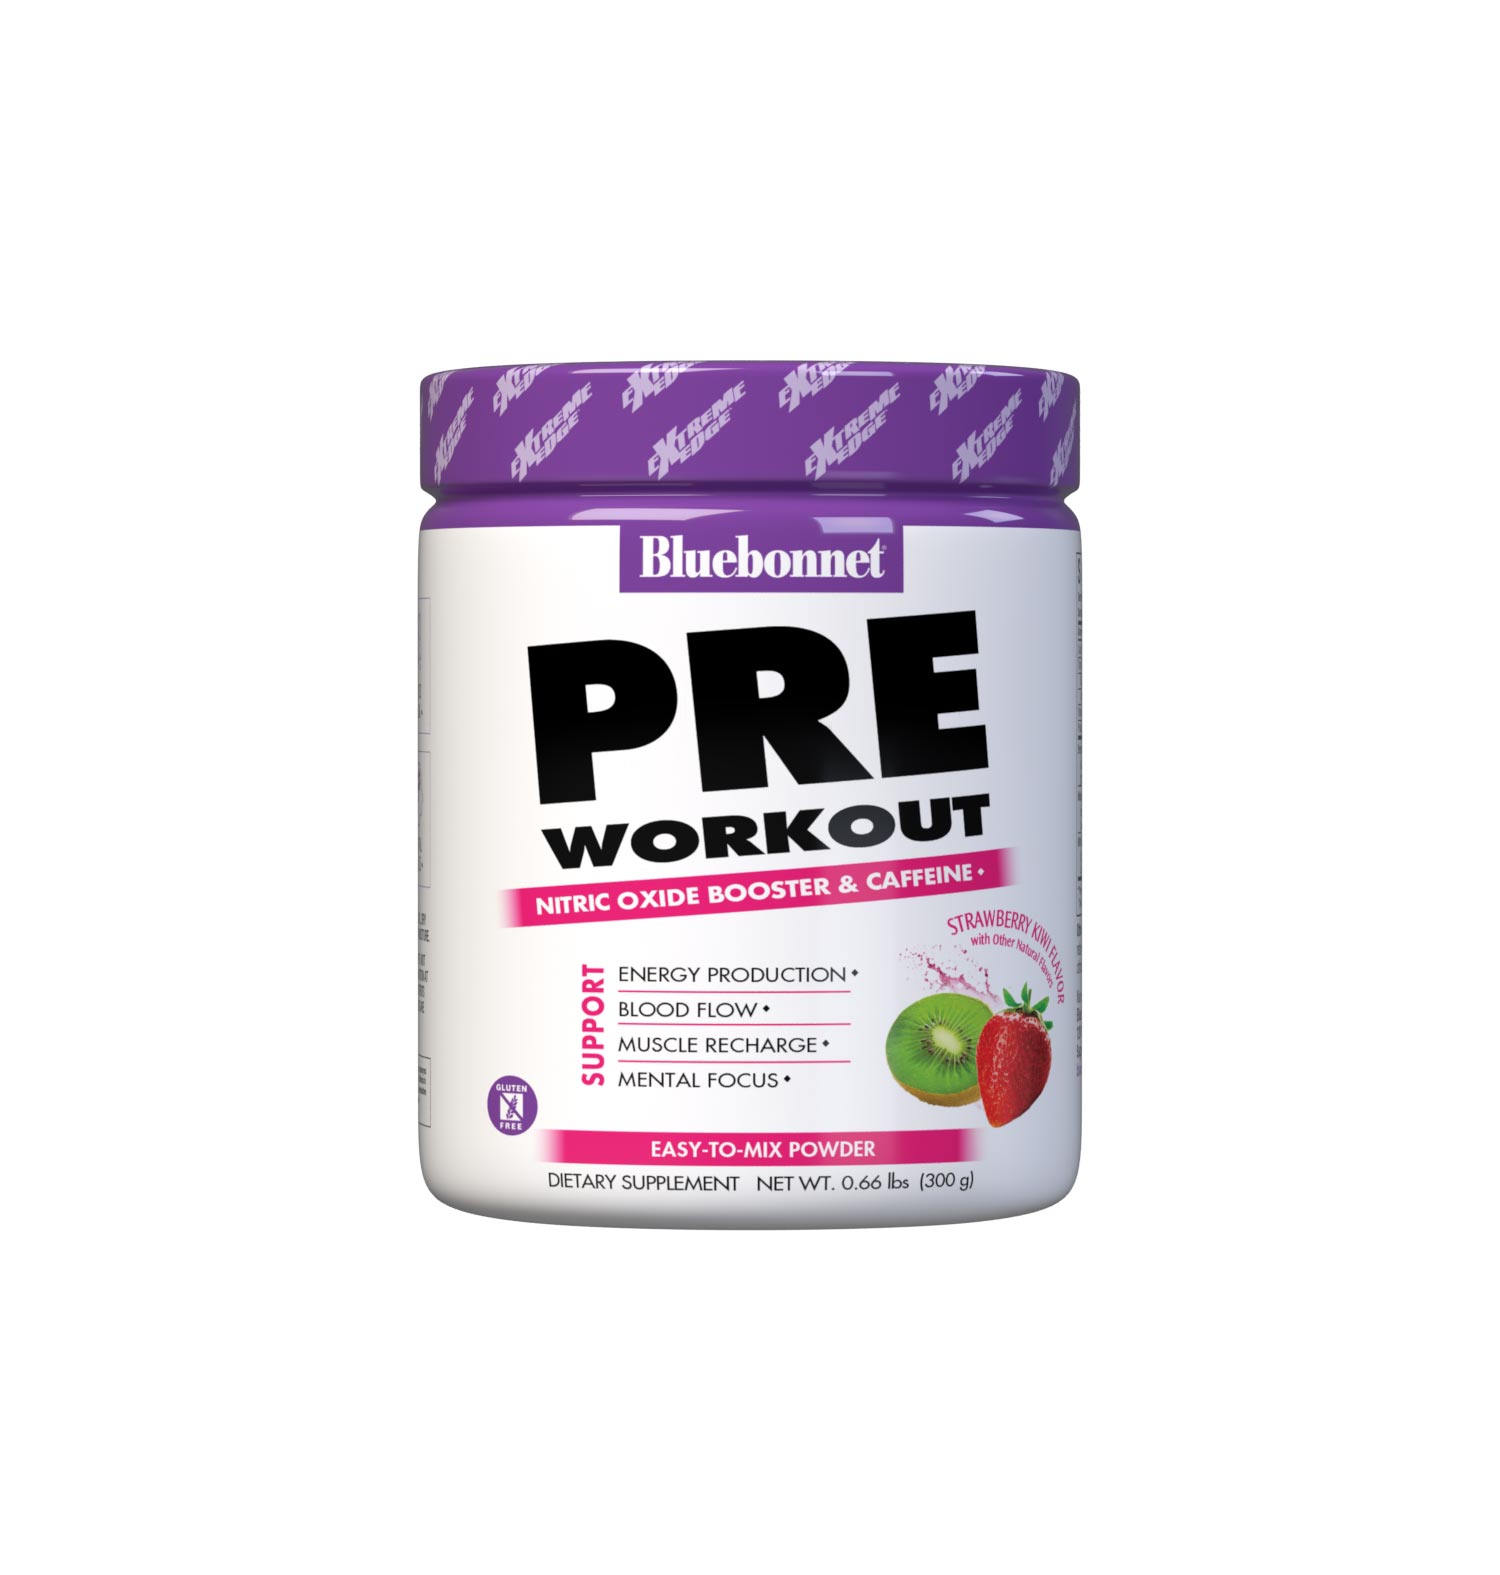  Bluebonnet's Strawberry Kiwi Flavored Pre Workout powder is designed to be one of the most comprehensive, muscle recharging formulas ever created. This triple-turbo, super-charged formula generates high energy, sharpens mental concentration, and increases nitric oxide (NO) levels for greater blood flow and intense muscle pumps. #size_0.66 lb